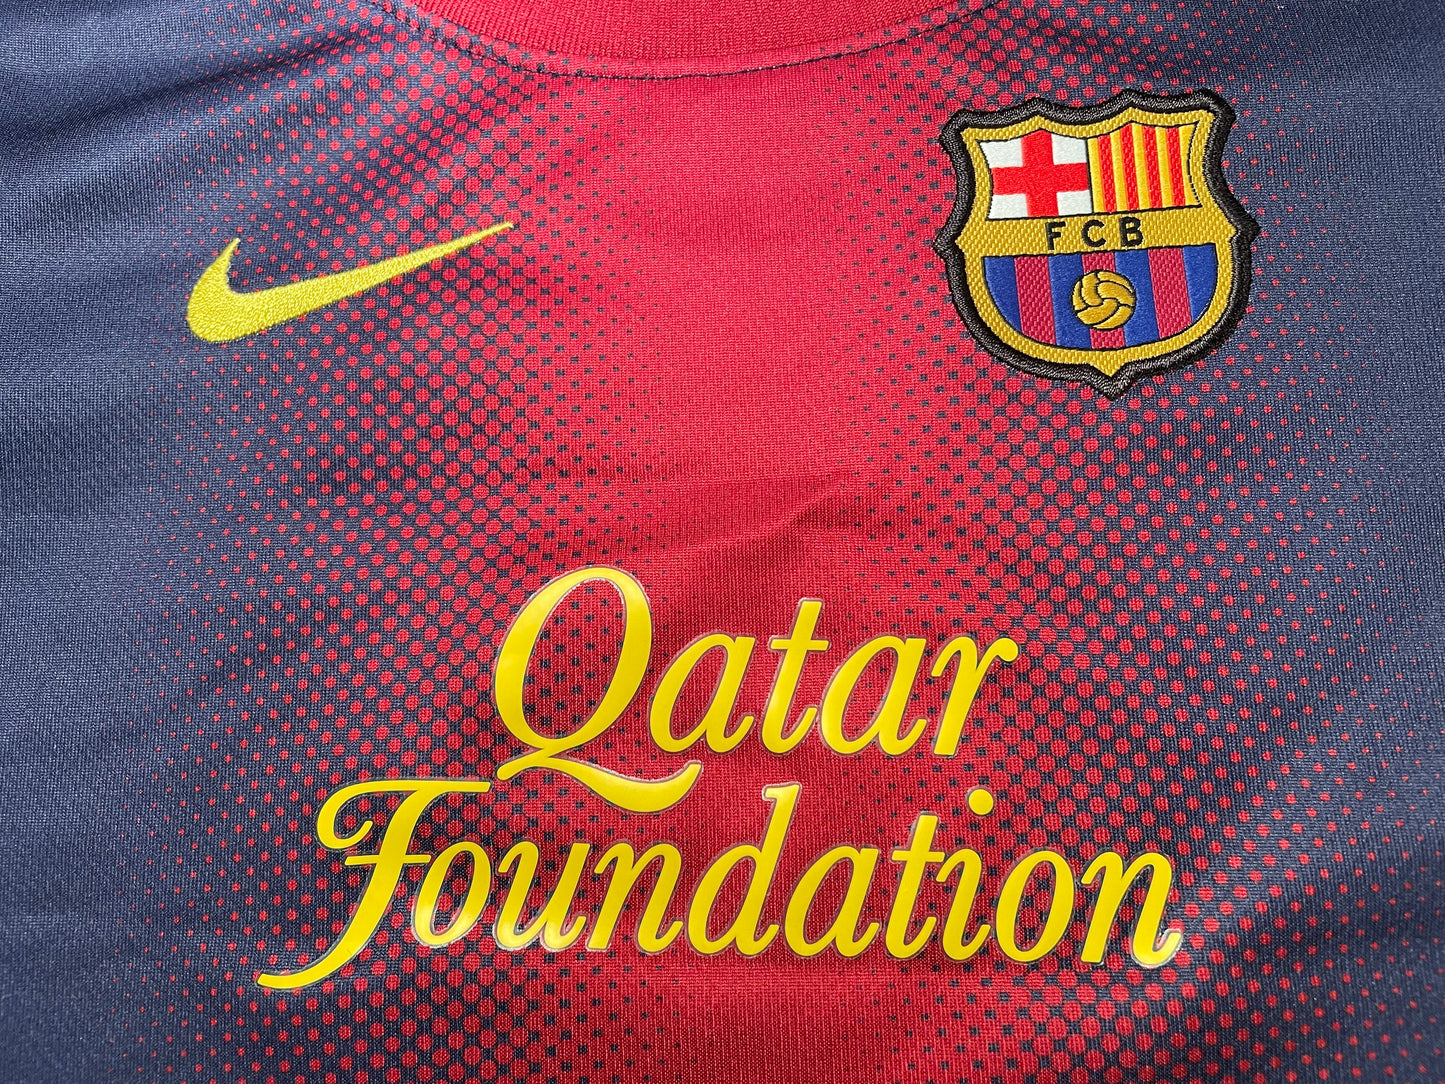 Barcelona Home Shirt 2012 (very good) Child XSmall Aged 4 to 6? Height 14 inches